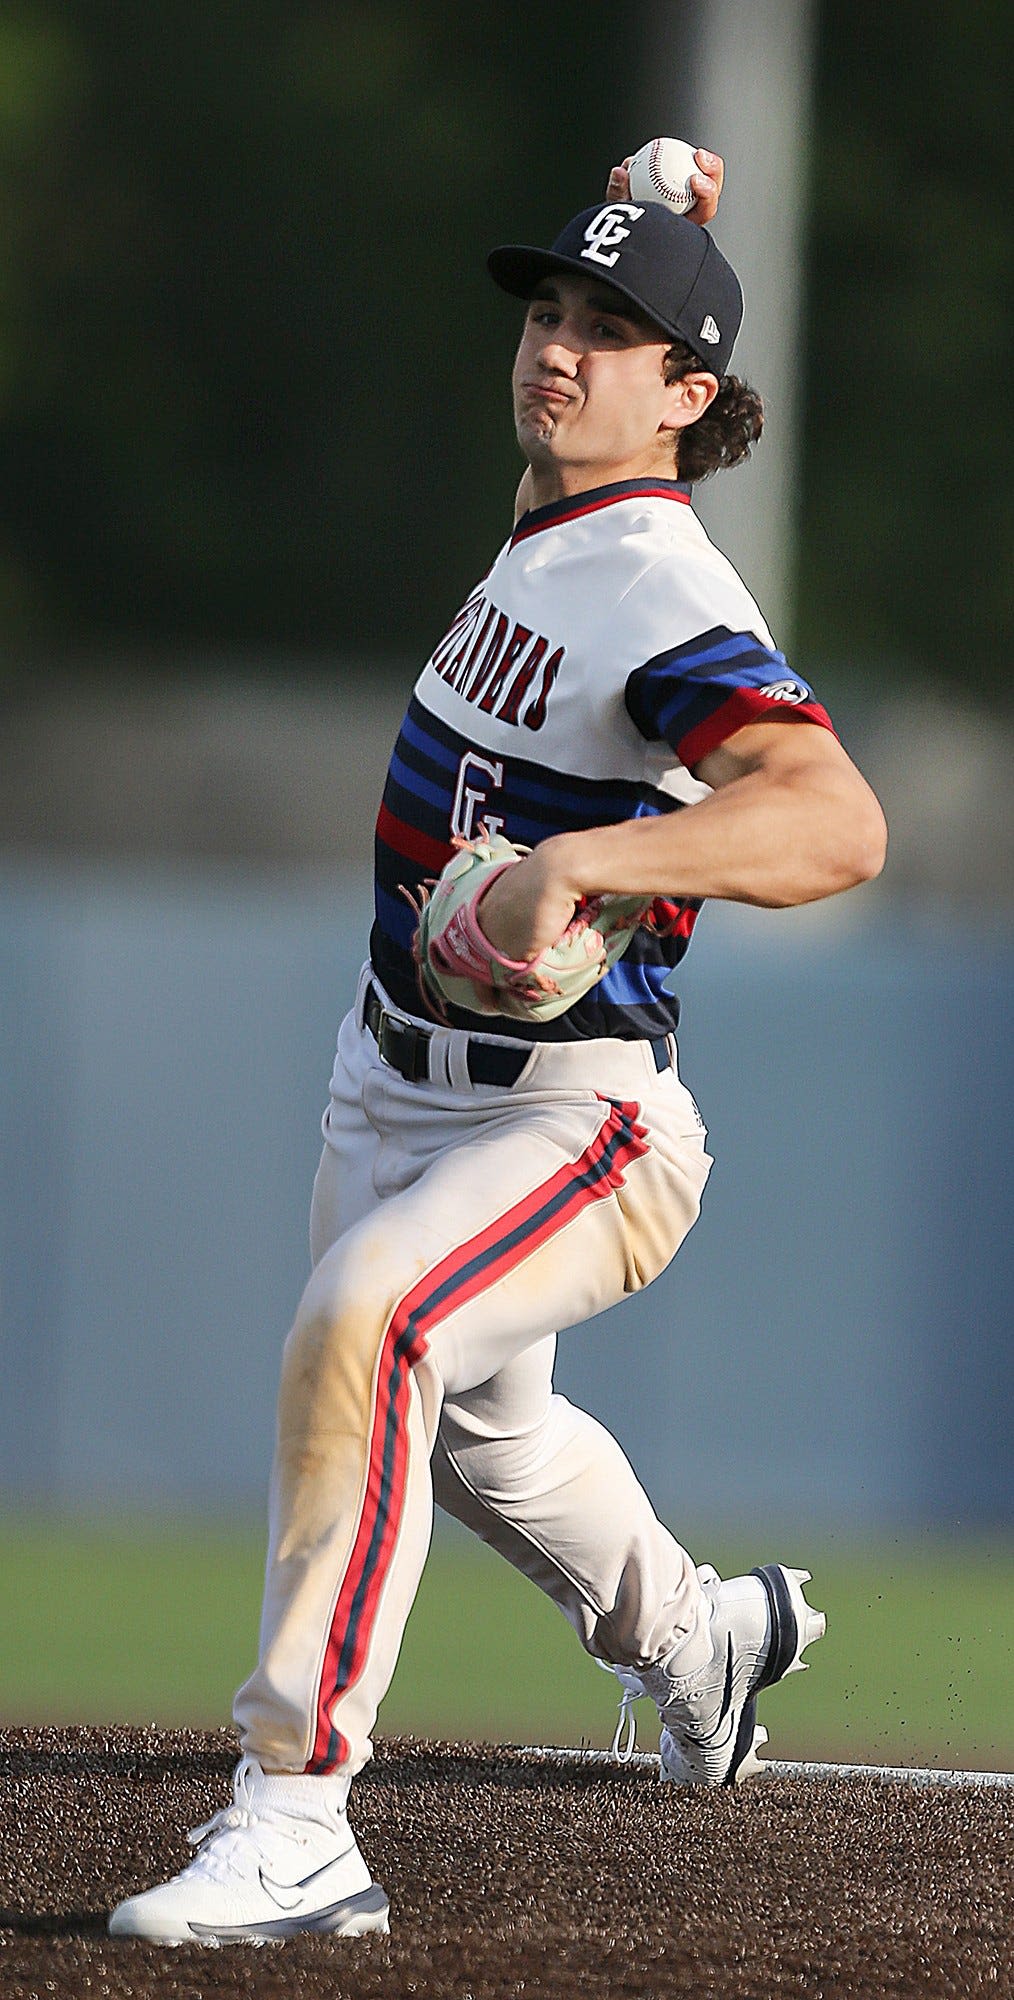 Baseball: Title-clinching comeback performance earns CN Player of the Year award